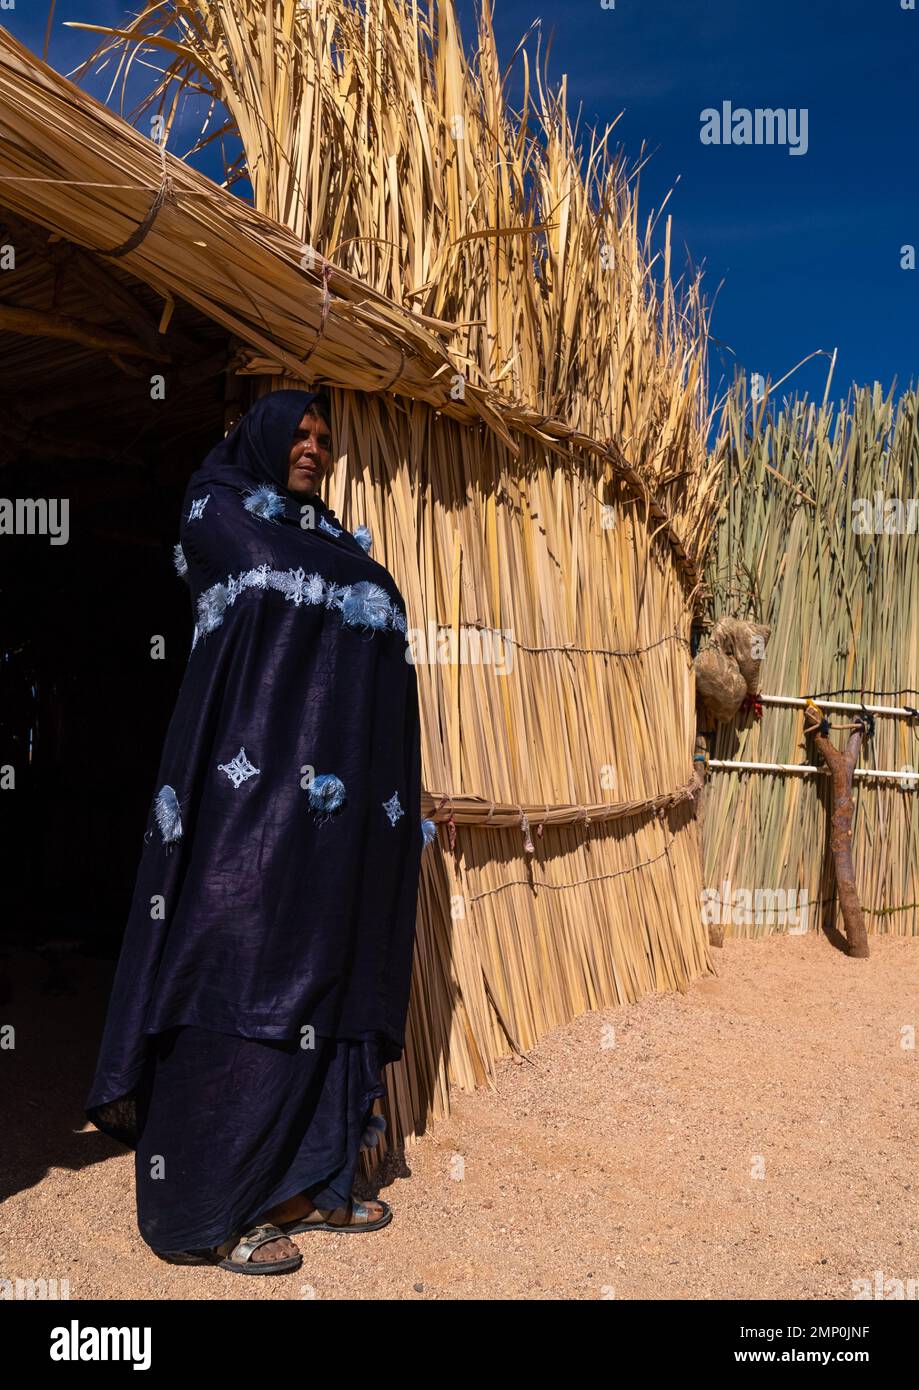 Tuareg woman standing in front of her reed house, North Africa, Tamanrasset, Algeria Stock Photo